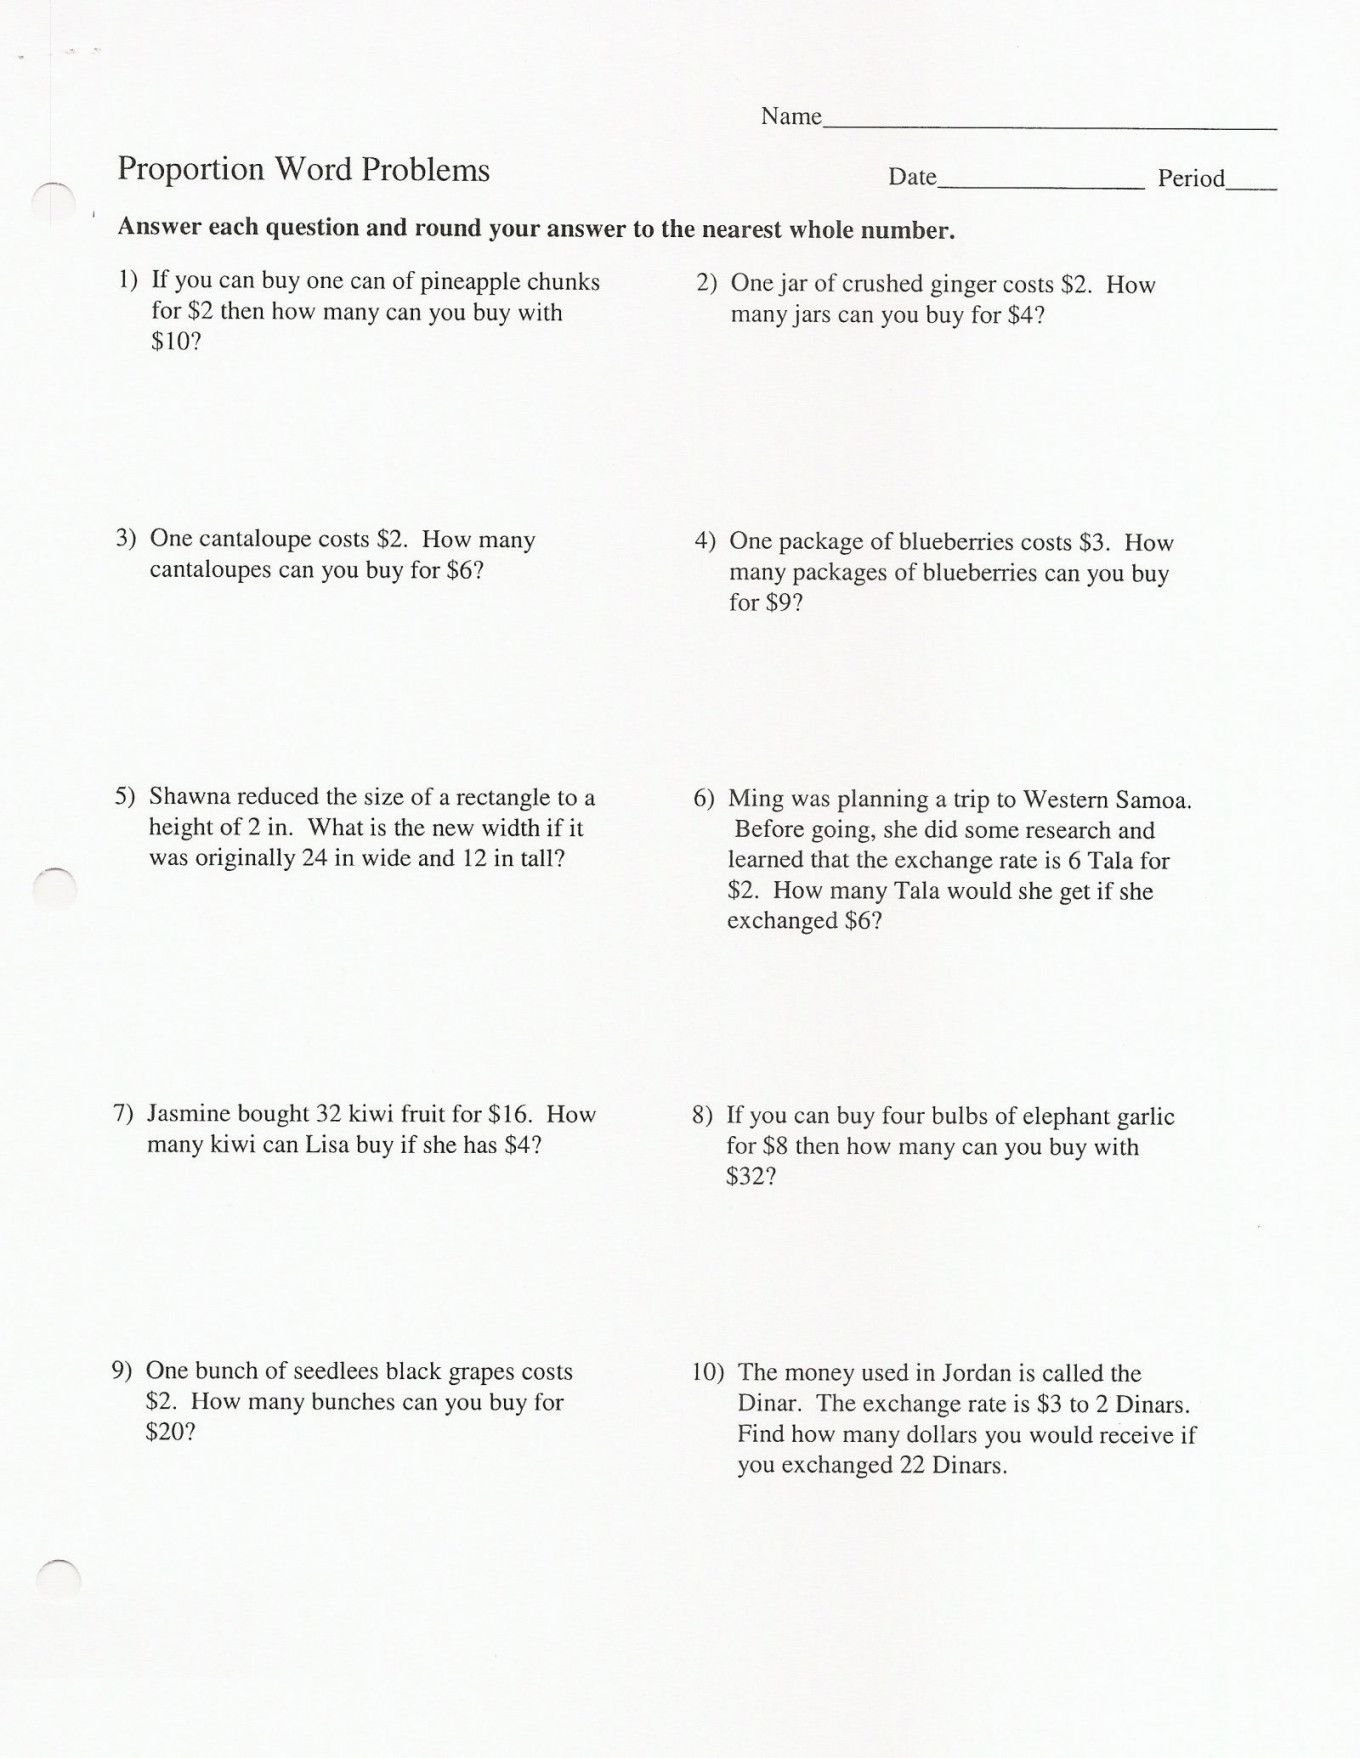 Solving Proportions Word Problems Worksheet  Soccerphysicsonline And Proportion Word Problems Worksheet